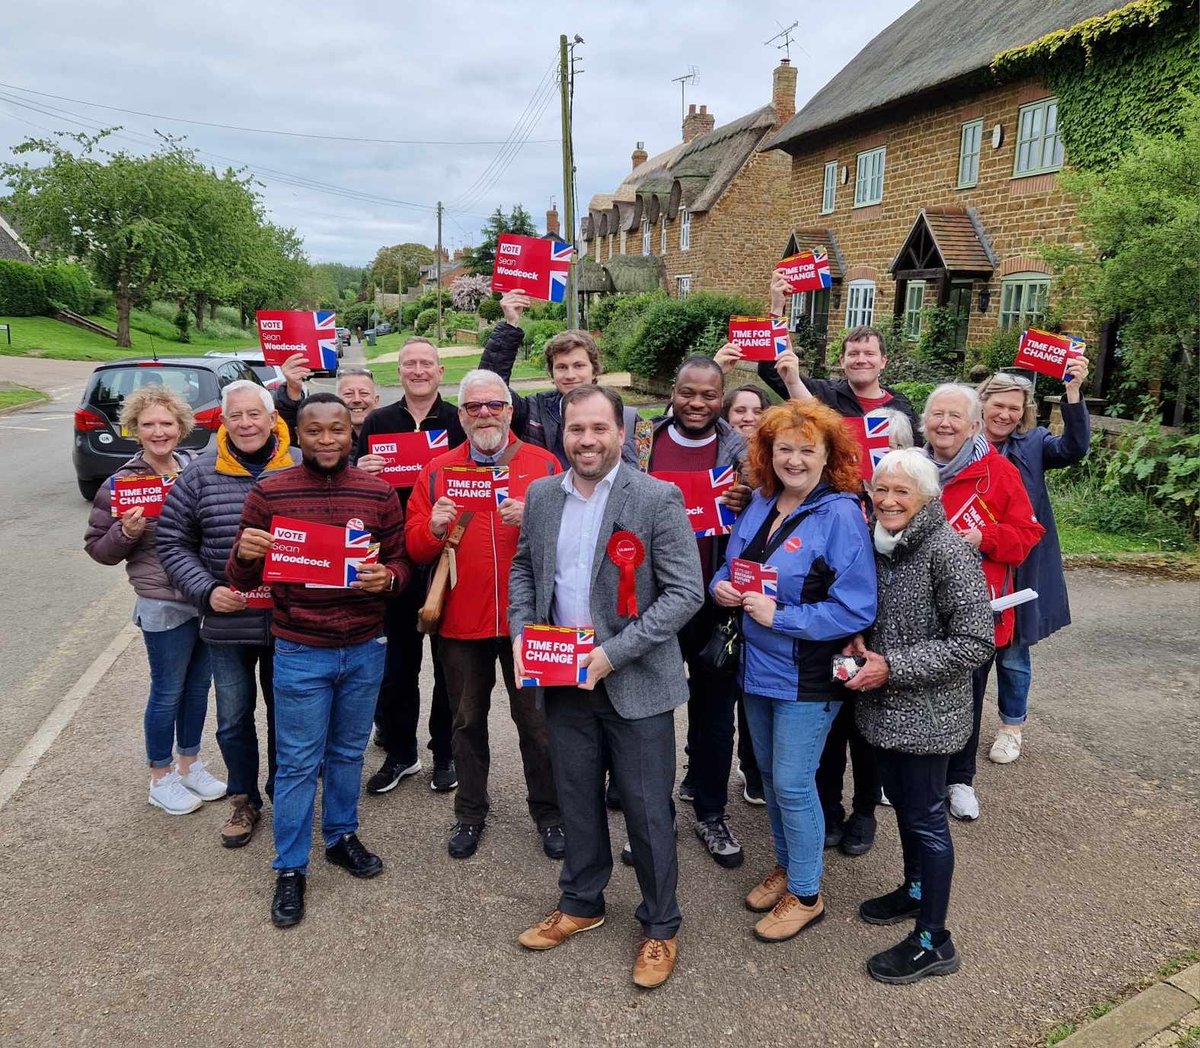 Great turnout for our first campaign session since the announcement of the General Election. Many residents of Hook Norton planning on voting for @SEANLWOODCOCK on July 4th.